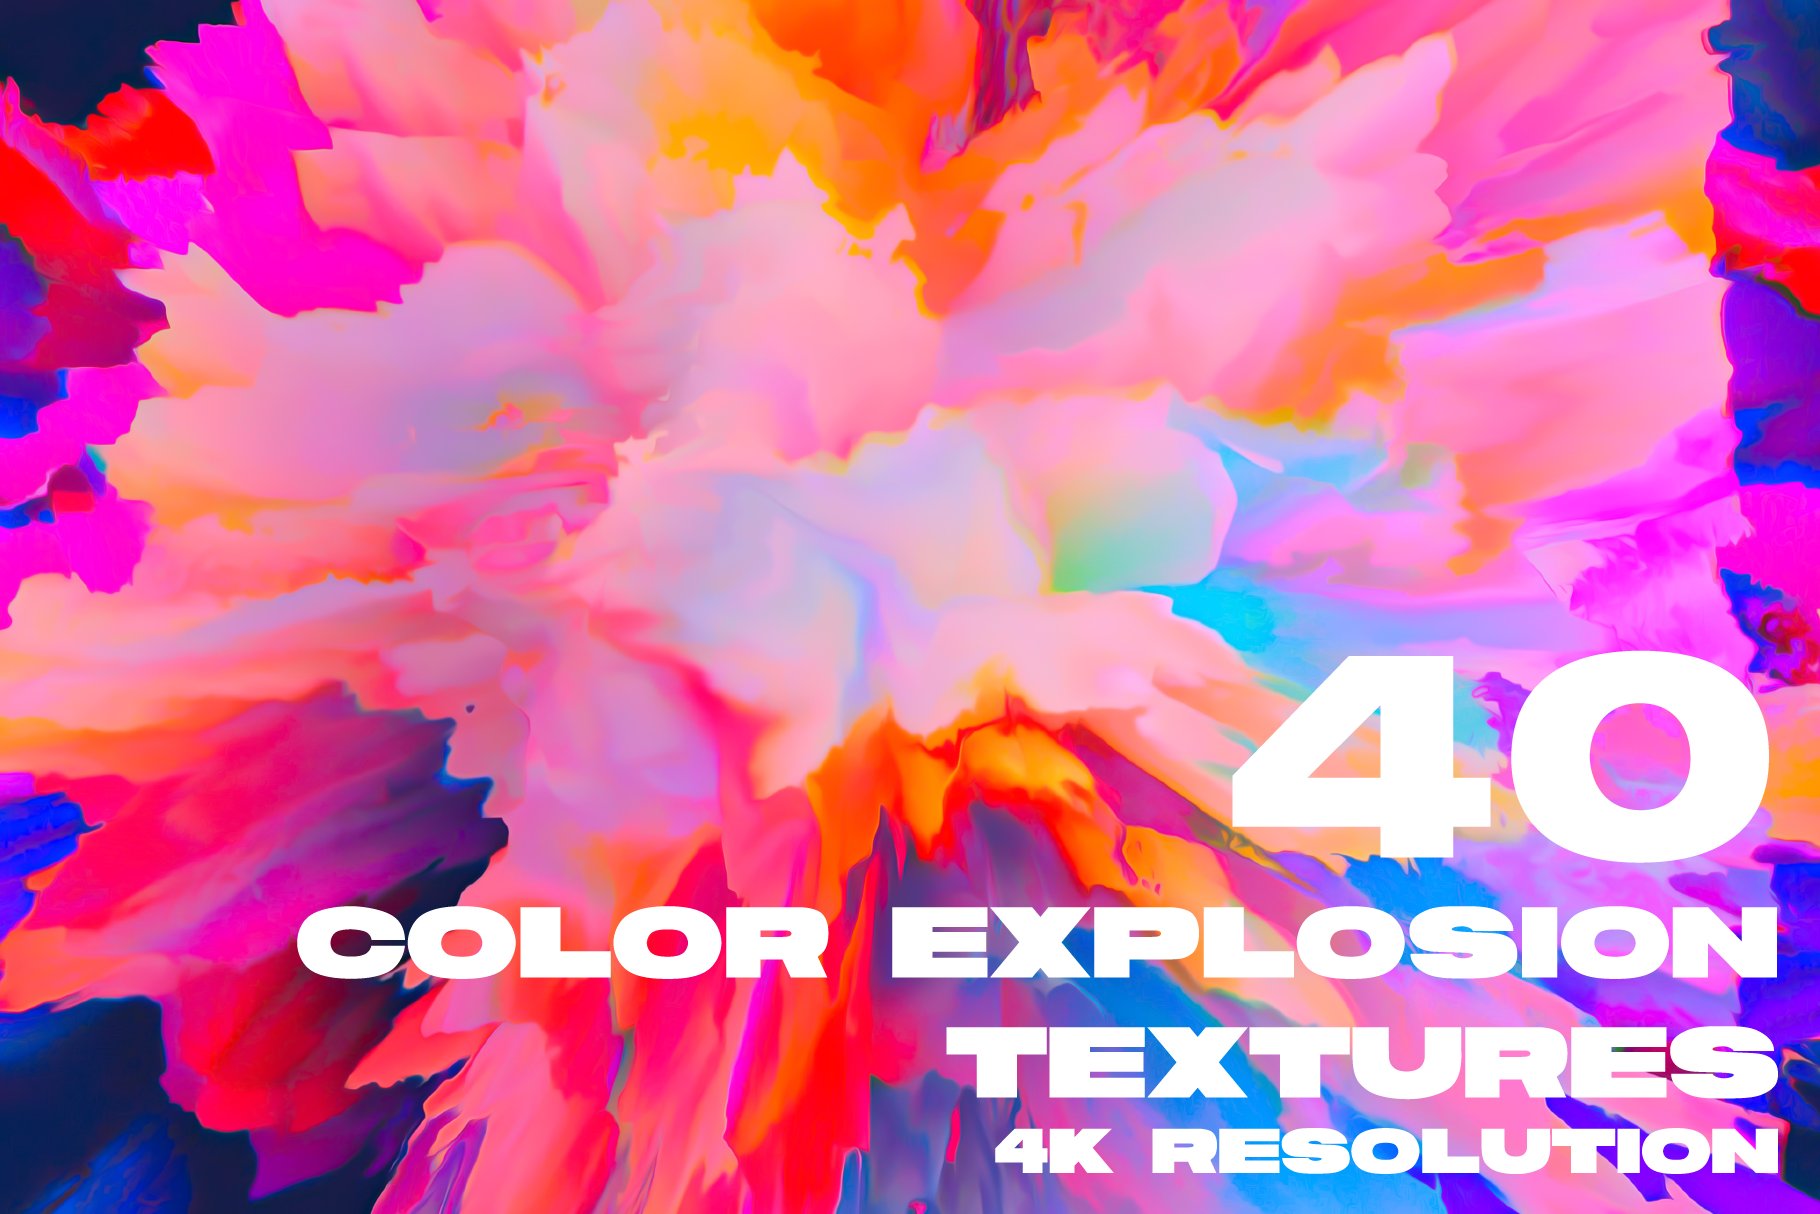 Color Explosion Textures cover image.